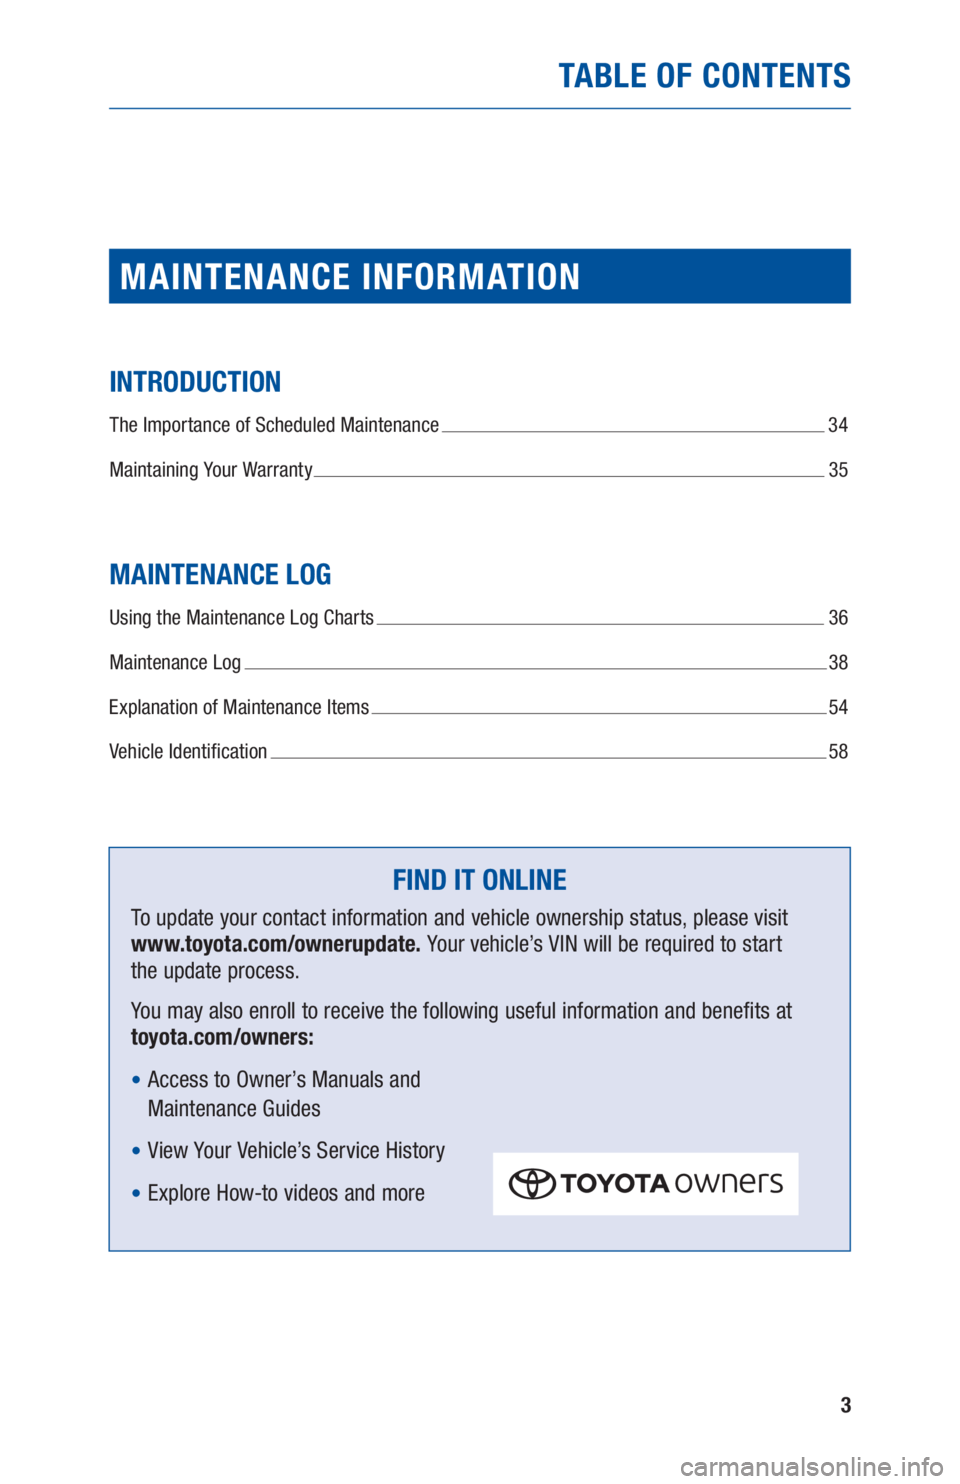 TOYOTA PRIUS 2019  Warranties & Maintenance Guides (in English) 3
TABLE OF CONTENTS
MAINTENANCE INFORMATION
INTRODUCTION
The Importance of Scheduled Maintenance  34
Maintaining Your Warranty 
 35
MAINTENANCE LOG
Using the Maintenance Log Charts  36
Maintenance Log